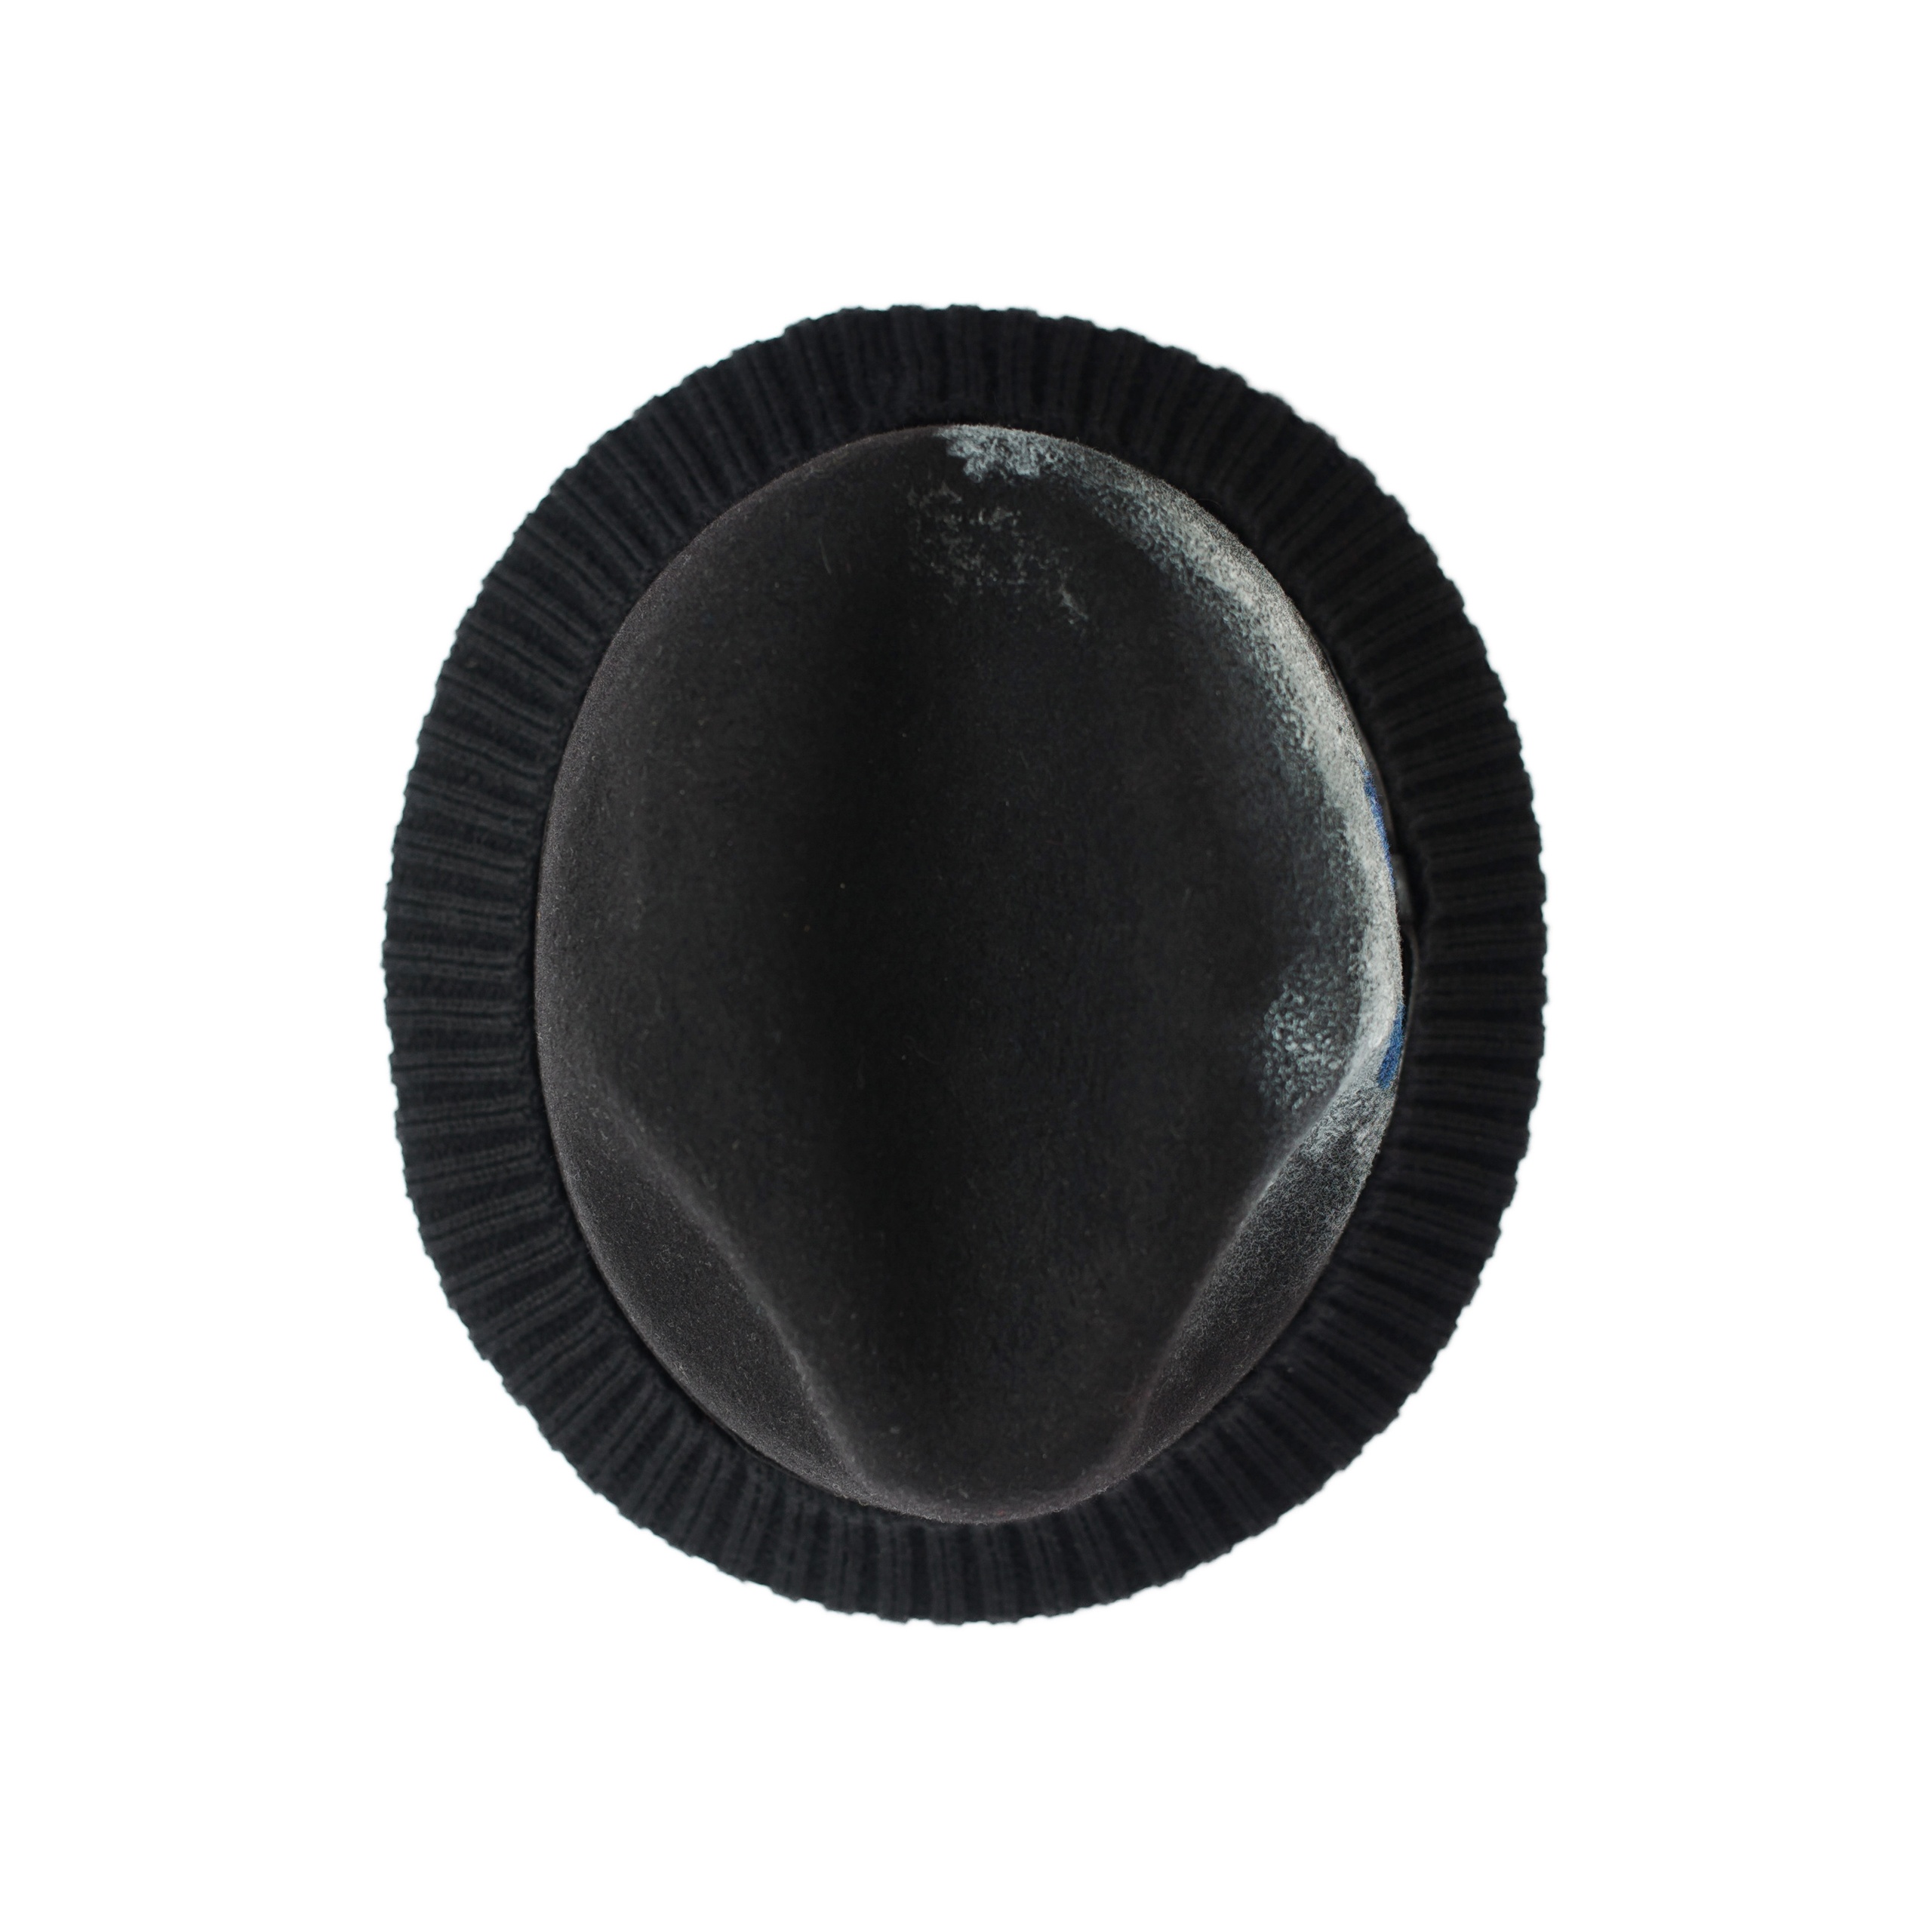 BLACK HAT WITH PAINT MARKS - 3